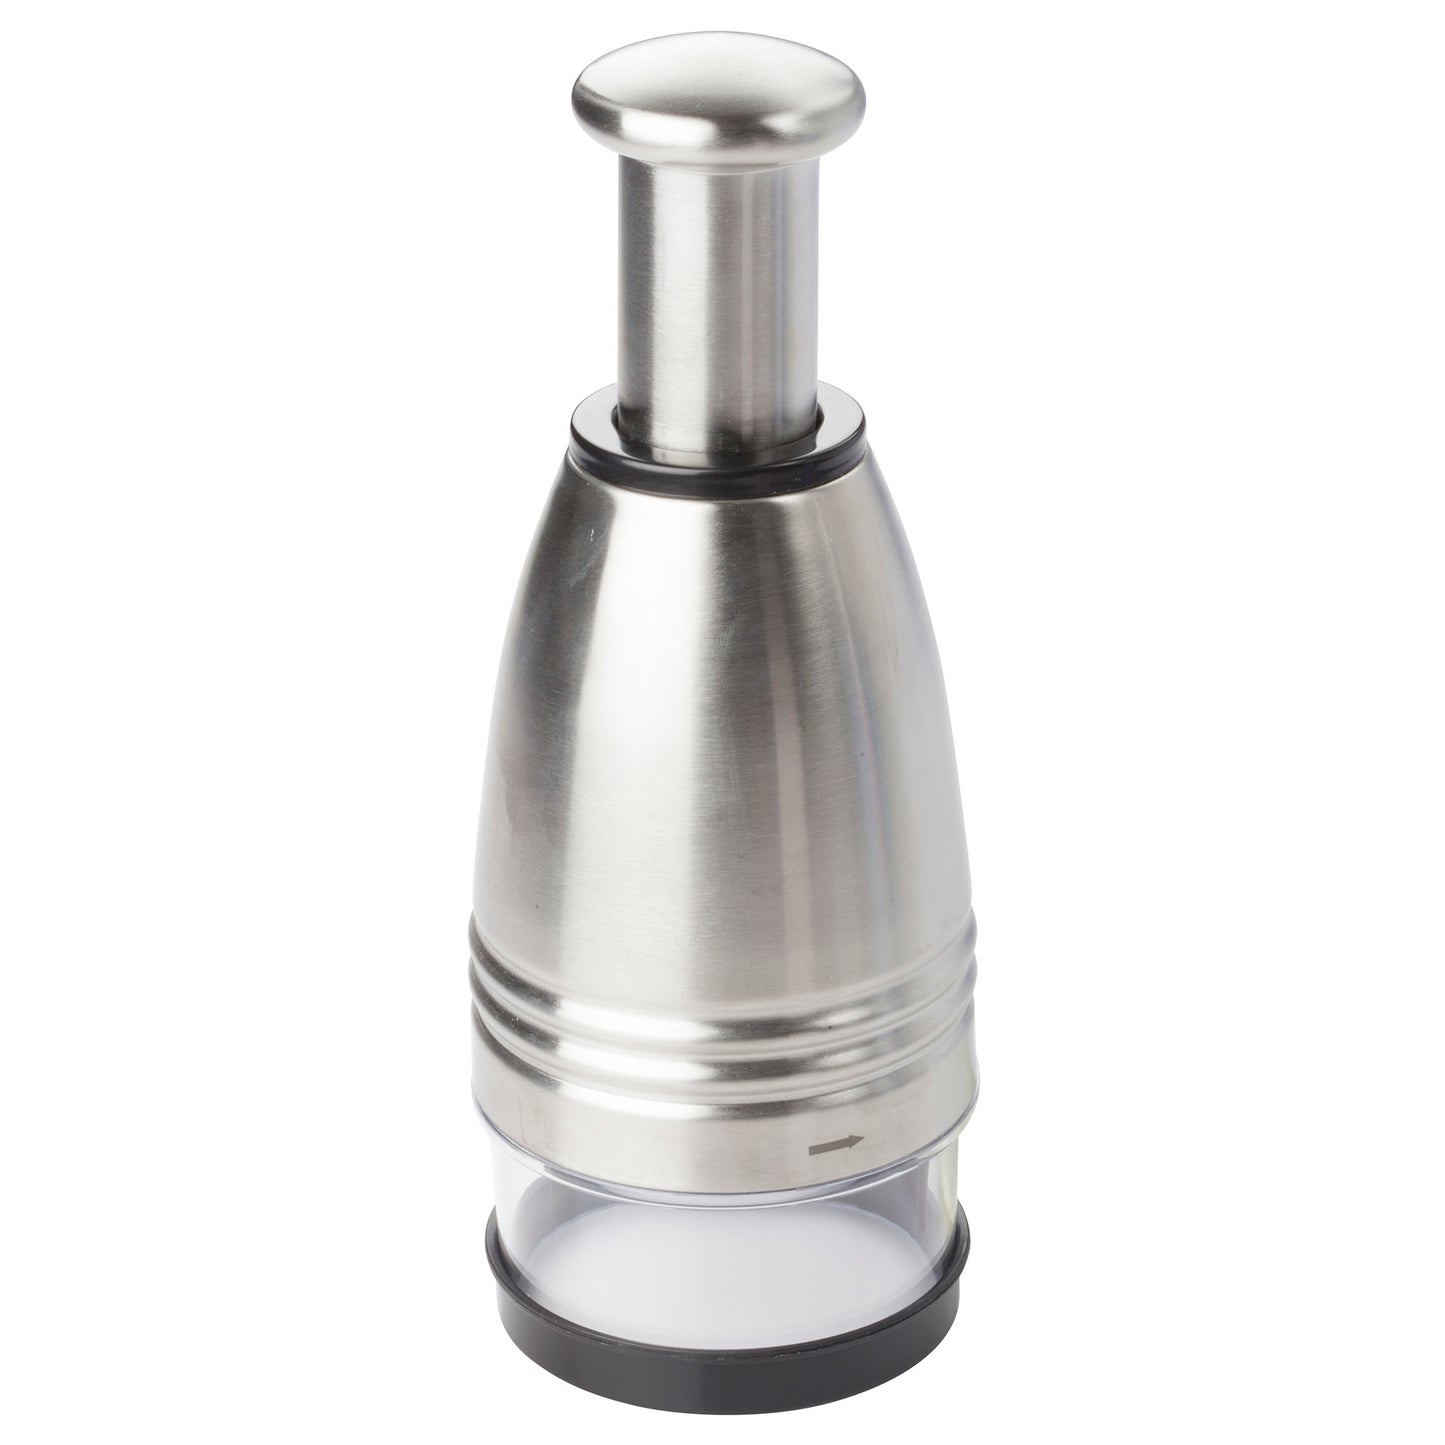 FCS-3 - Food Chopper, Plastic Base, Stainless Steel